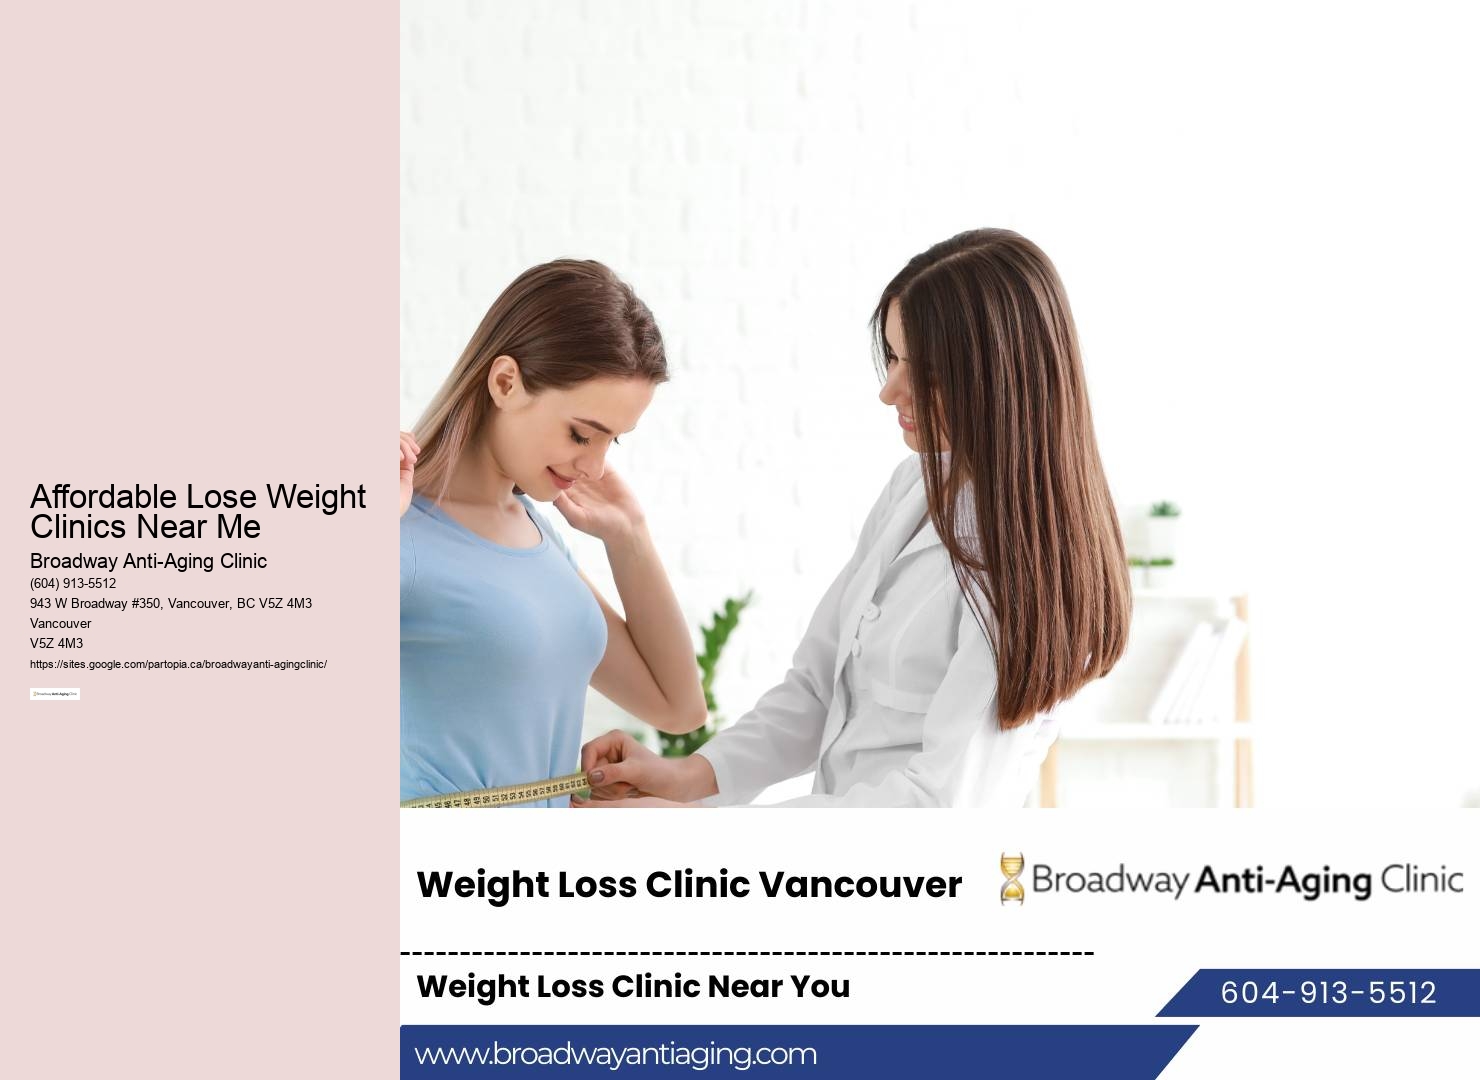 Affordable Lose Weight Clinics Near Me